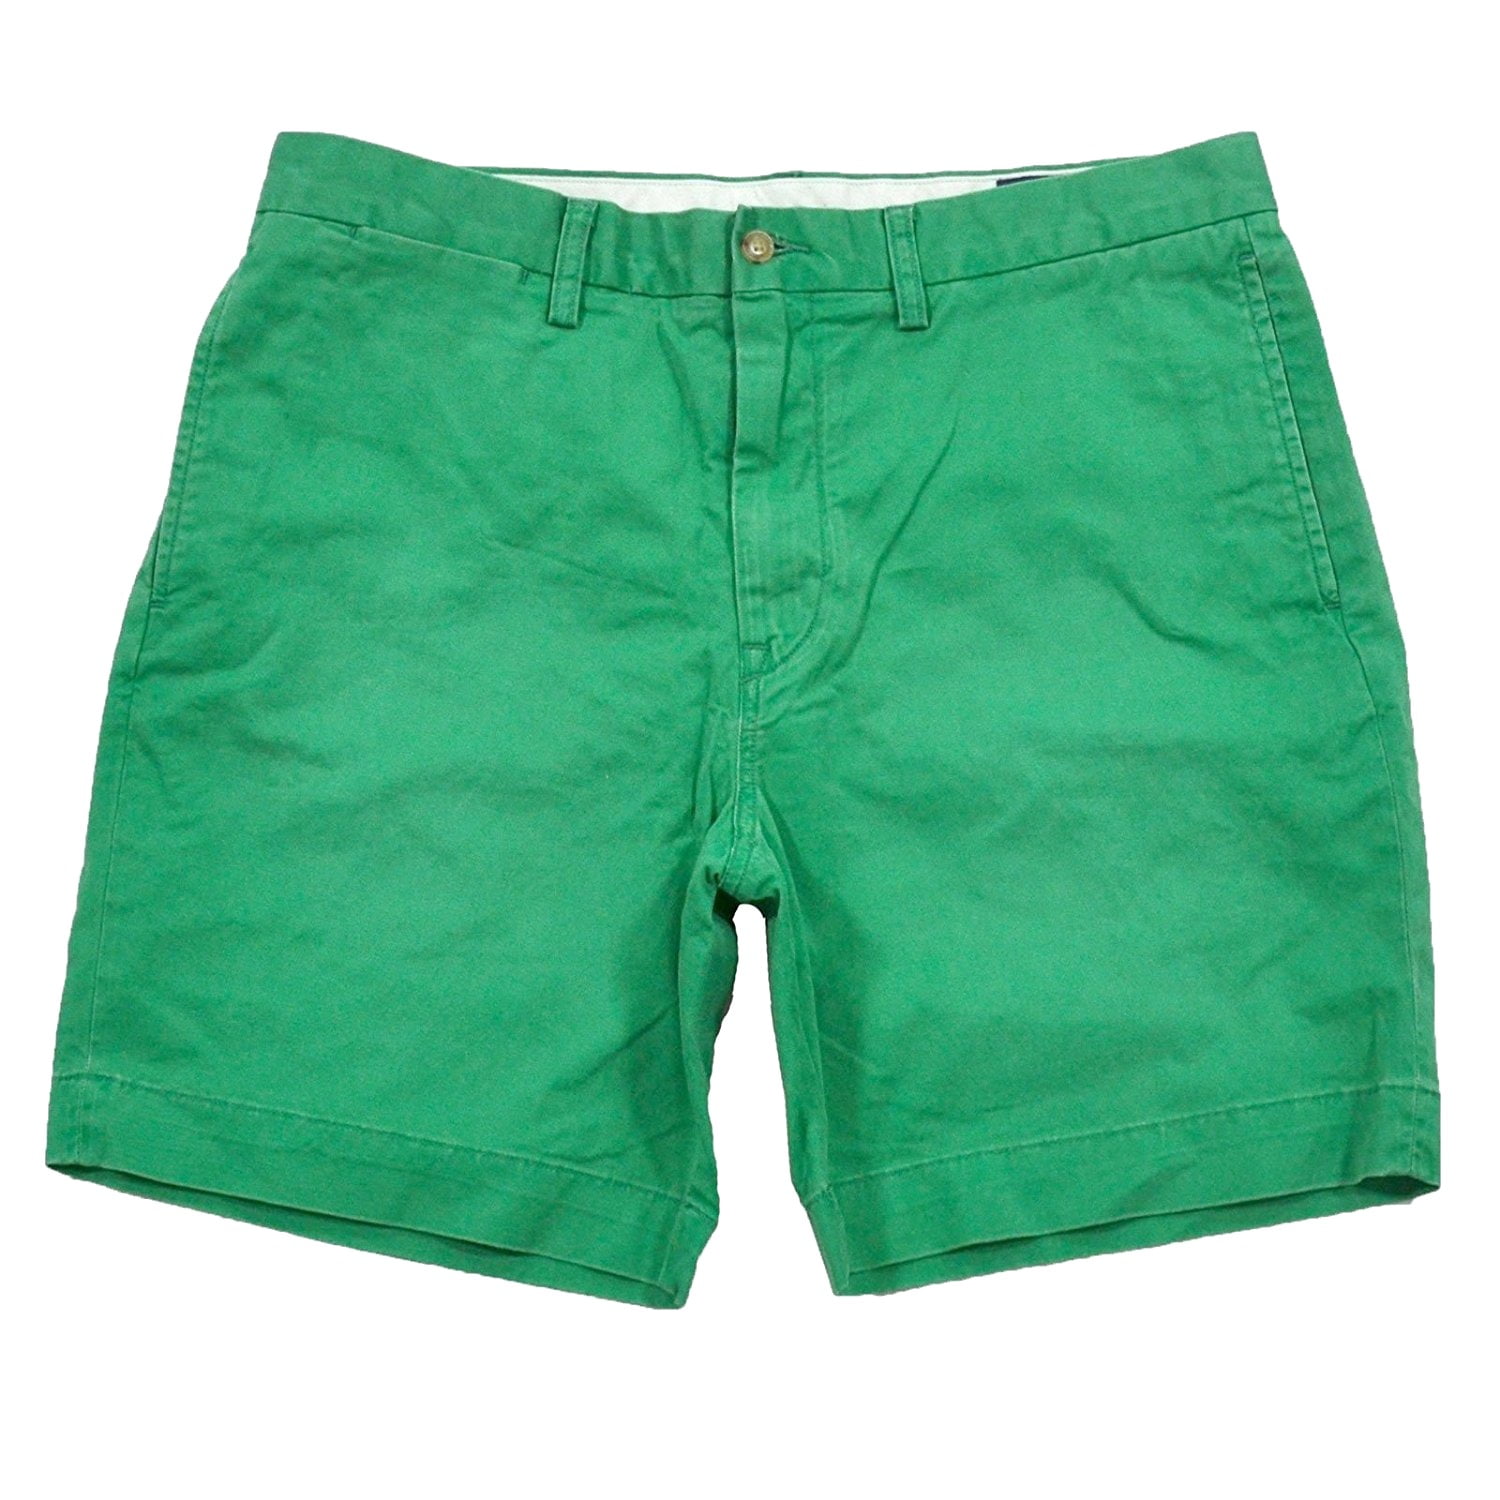 Polo by Ralph Lauren Shorts 36 Blue Green Stretch Classic Fit